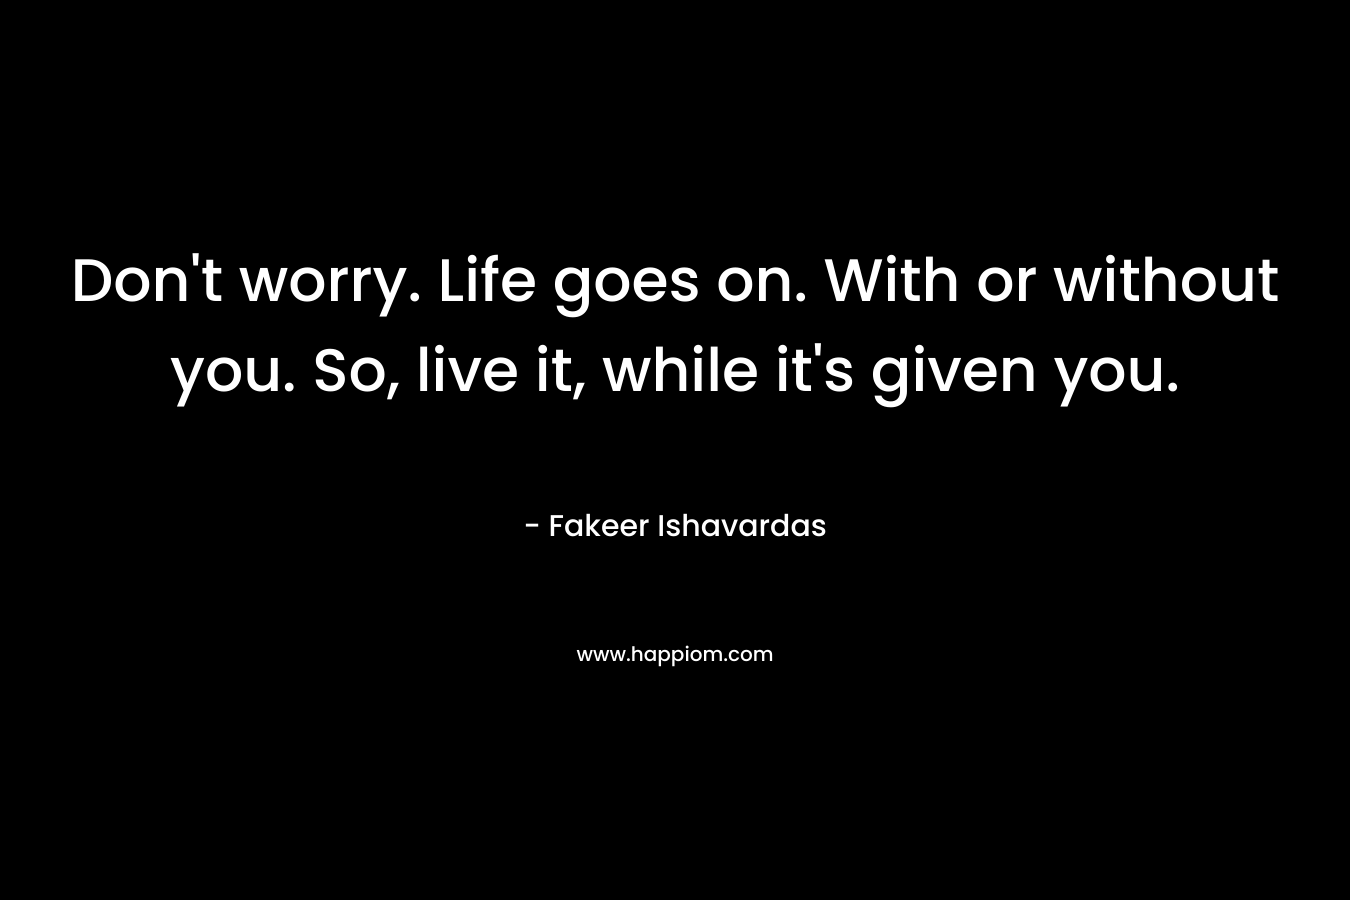 Don't worry. Life goes on. With or without you. So, live it, while it's given you.